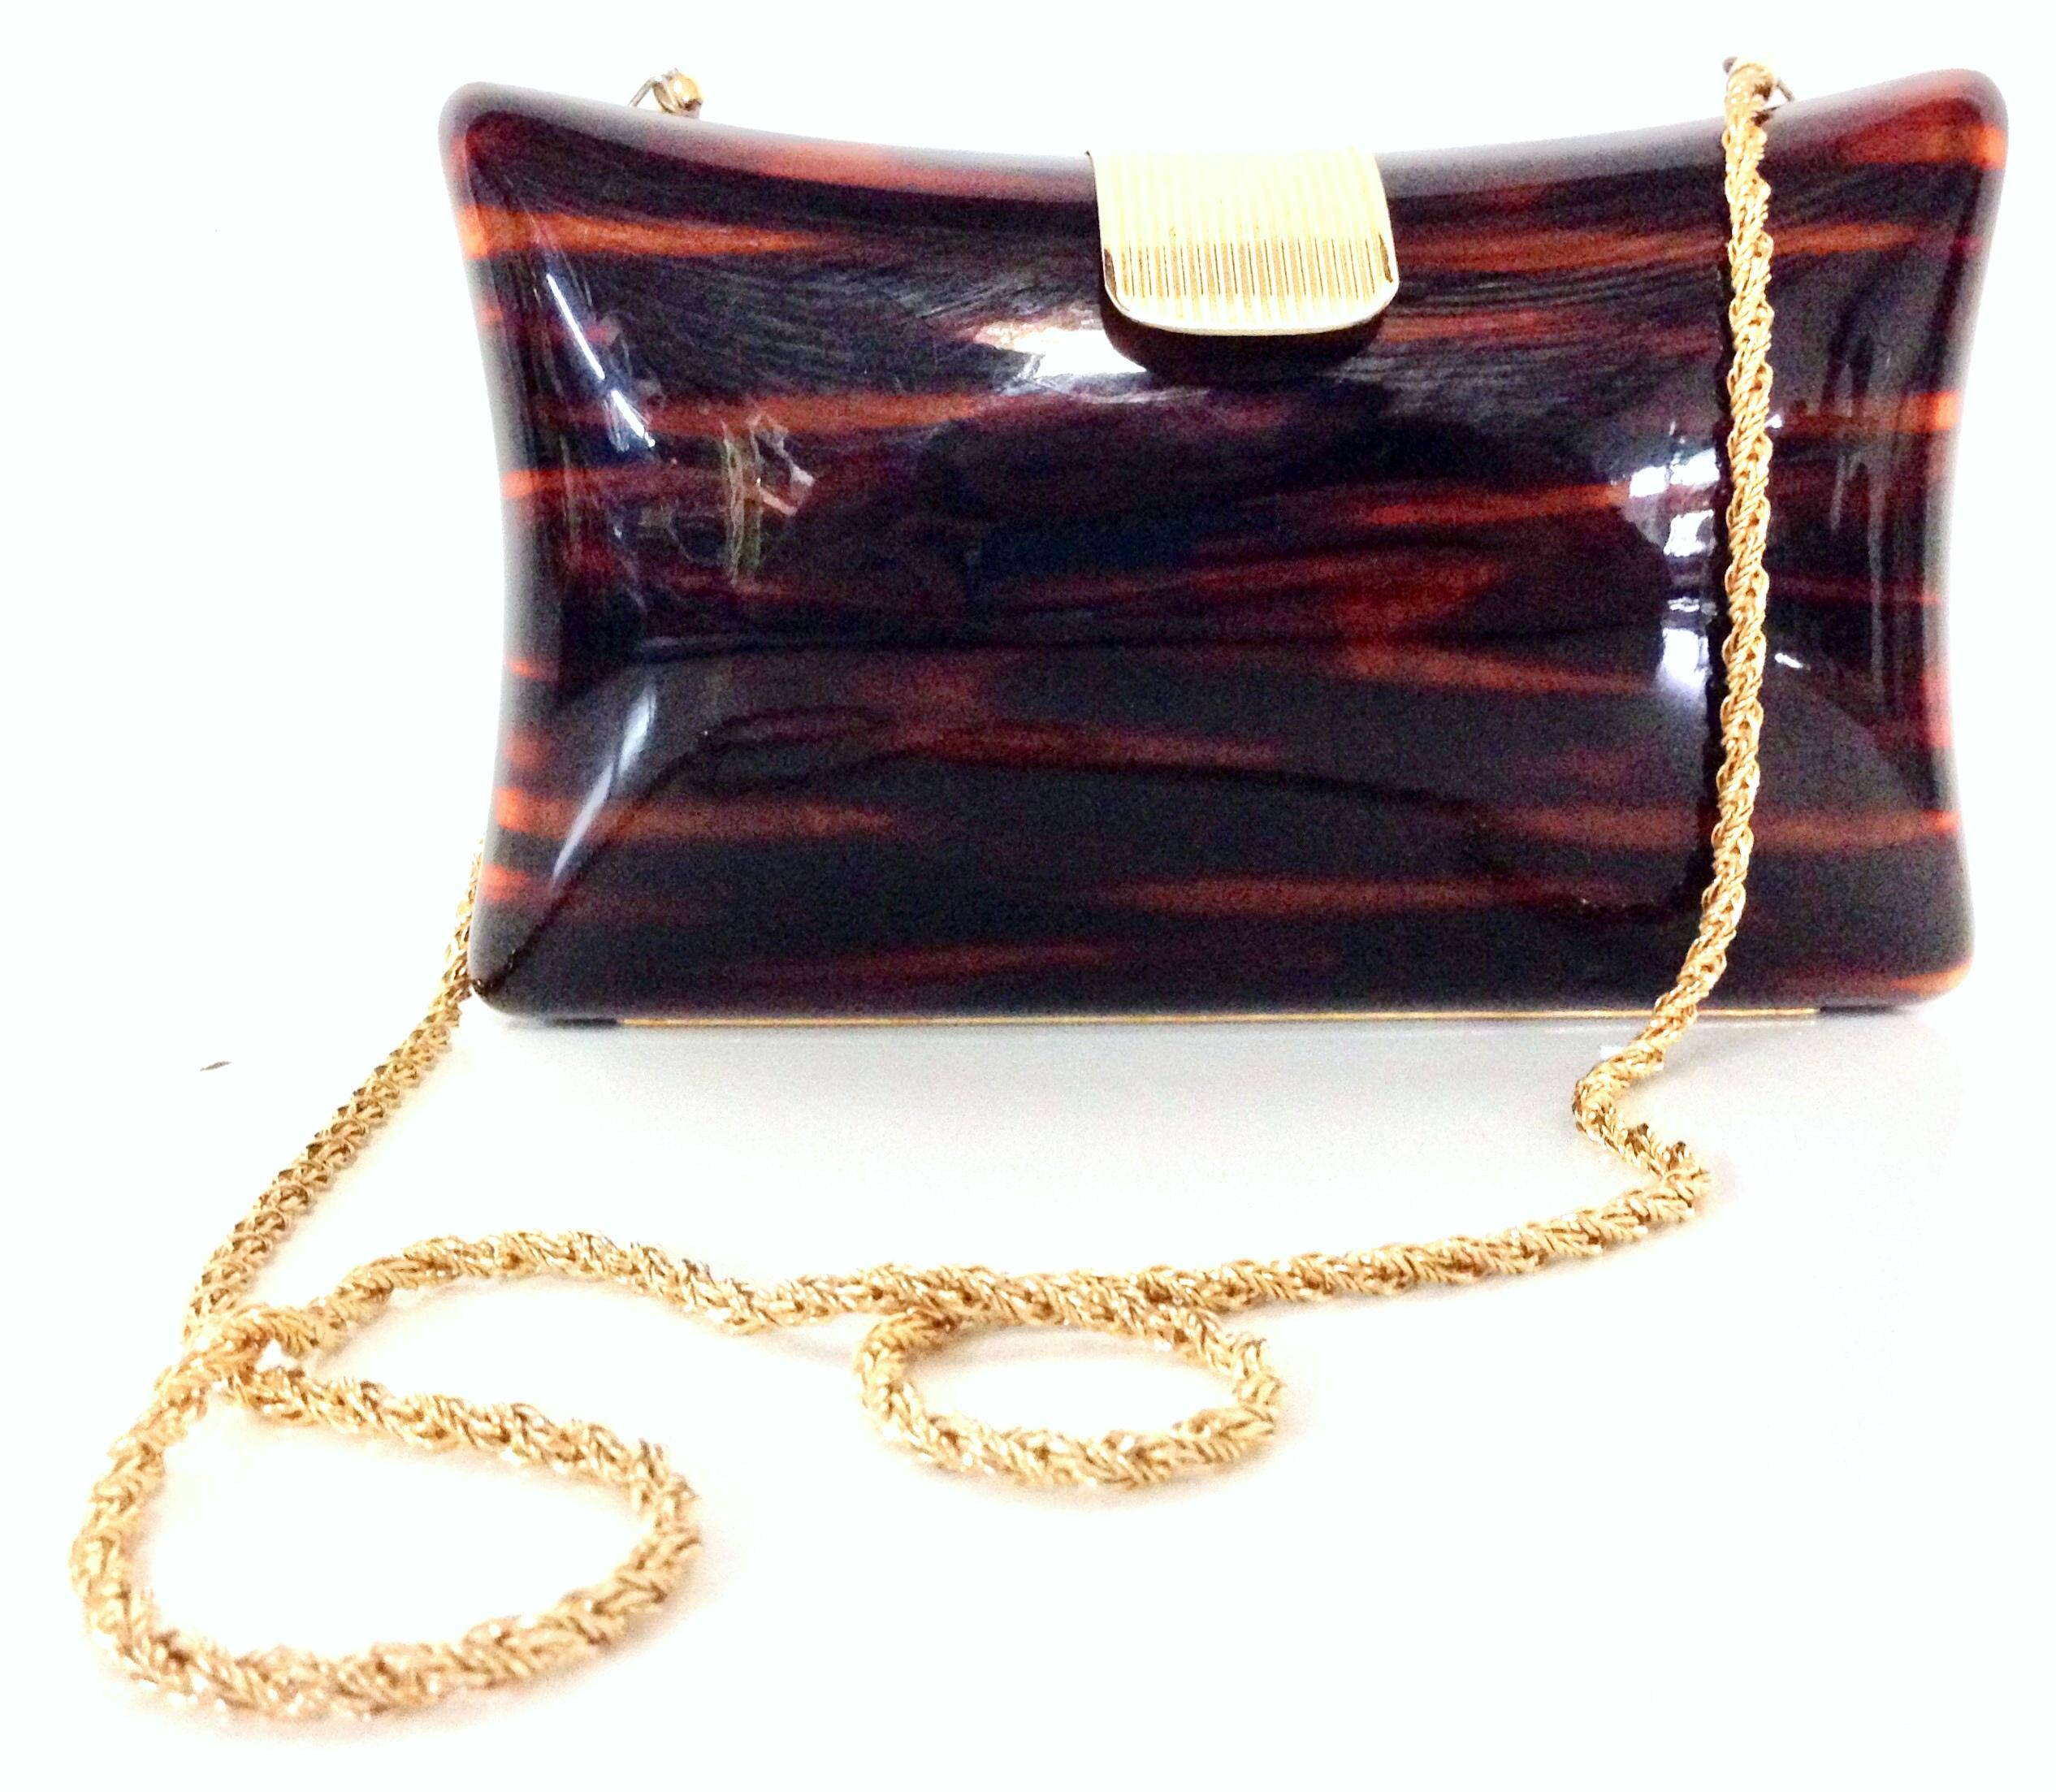 1980'S Italian Lucite faux-tortoise & gilt gold brass hard case hand bag By, Jordan Marsh. This polished Lucite faux tortoise clutch or shoulder hand bag feature, gilt gold brass fold over clasp, and chain link shoulder strap with a 17.5